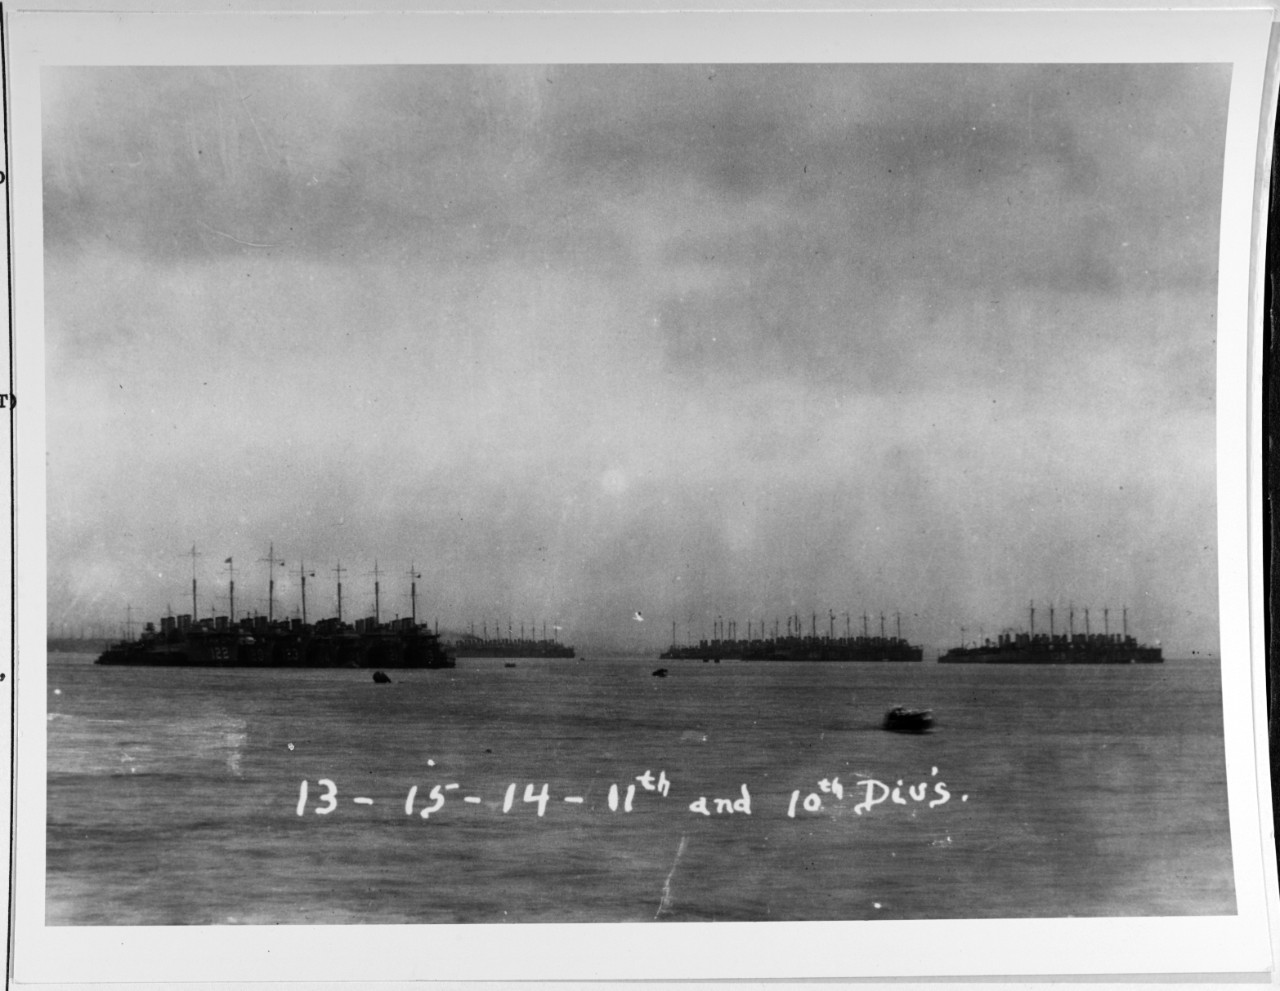 Photo #: NH 69514  Destroyer Divisions 13, 15, 14, 11 and 10